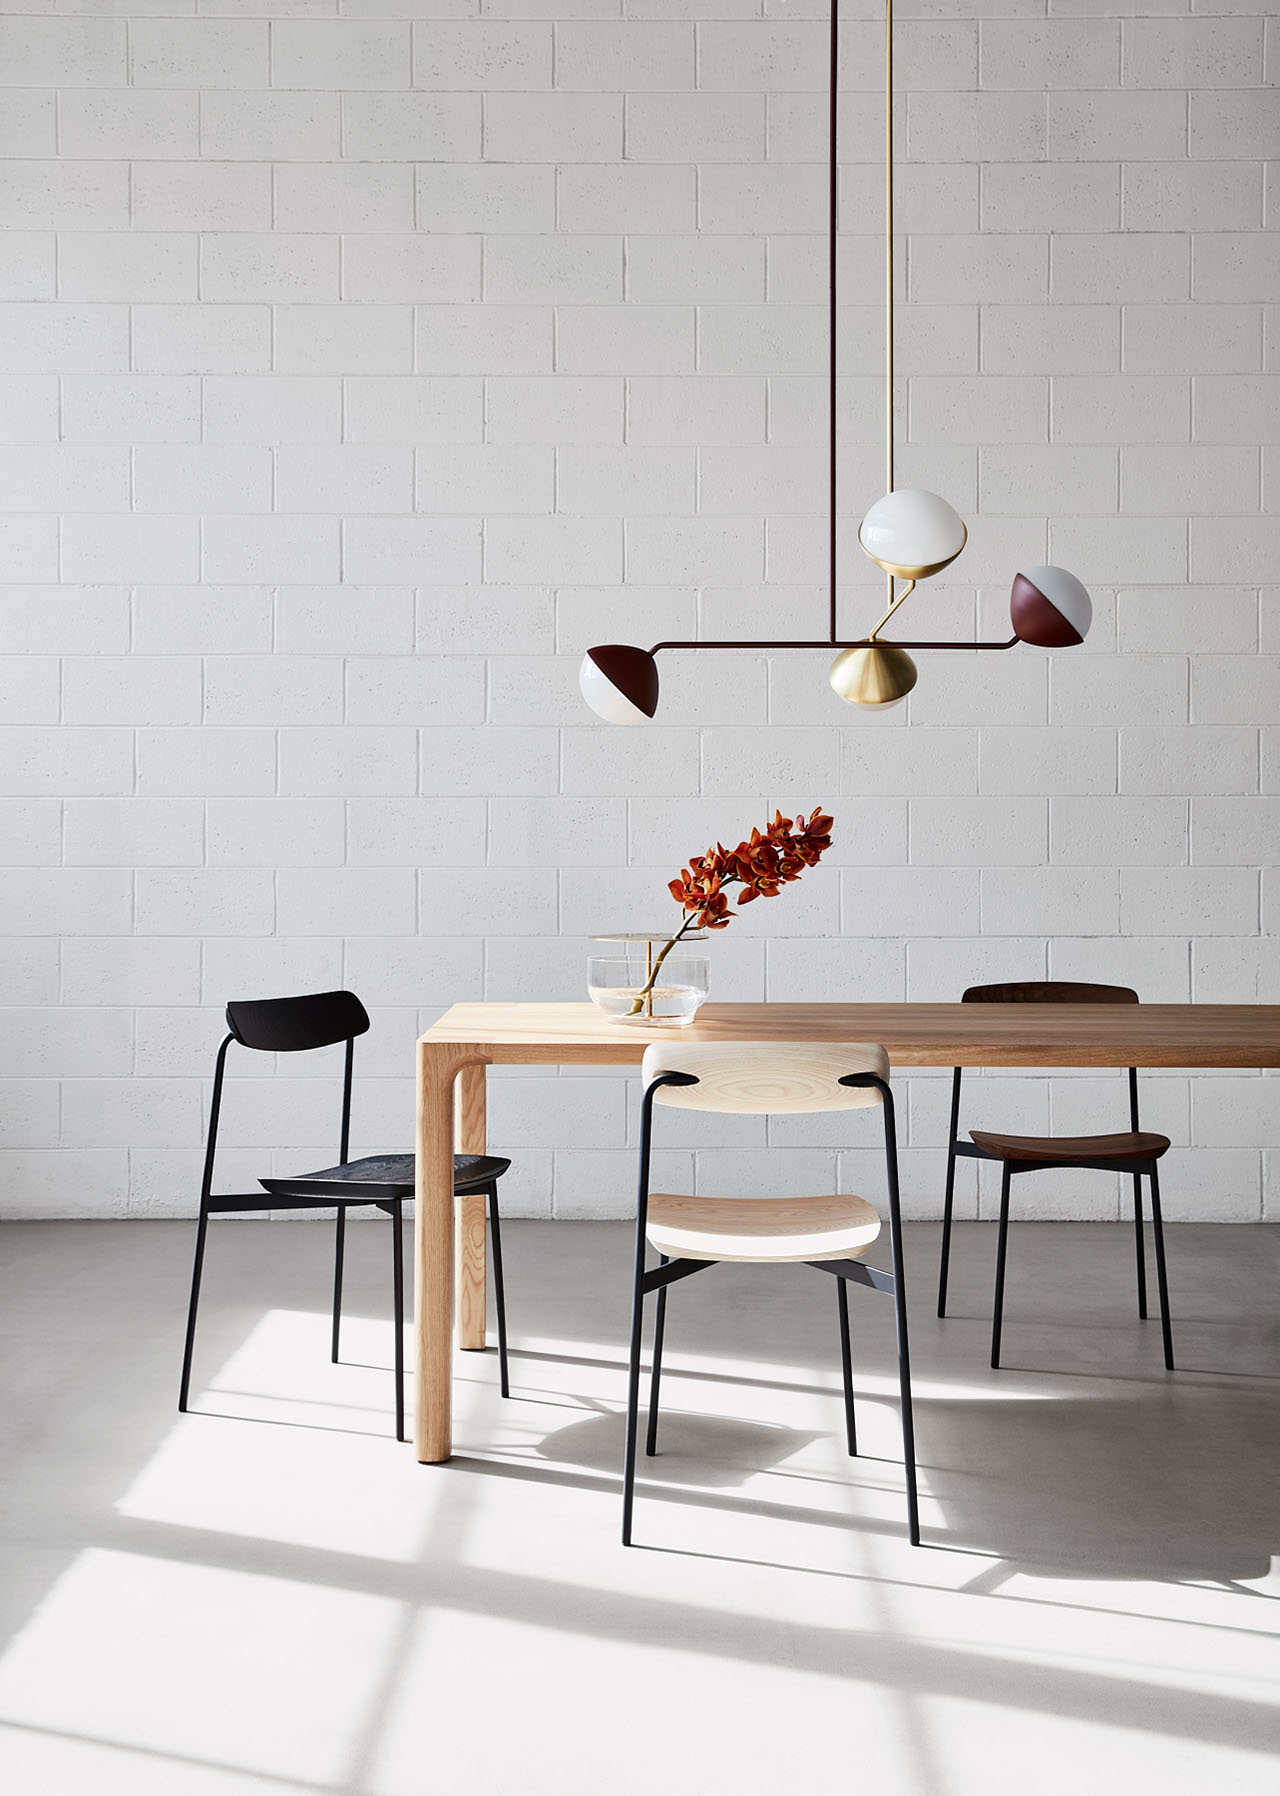 Jolly Double Rod Pendant by Kate Stokes and Sia chair by Tom Fereday for NAU  (LOCAL DESIGN).